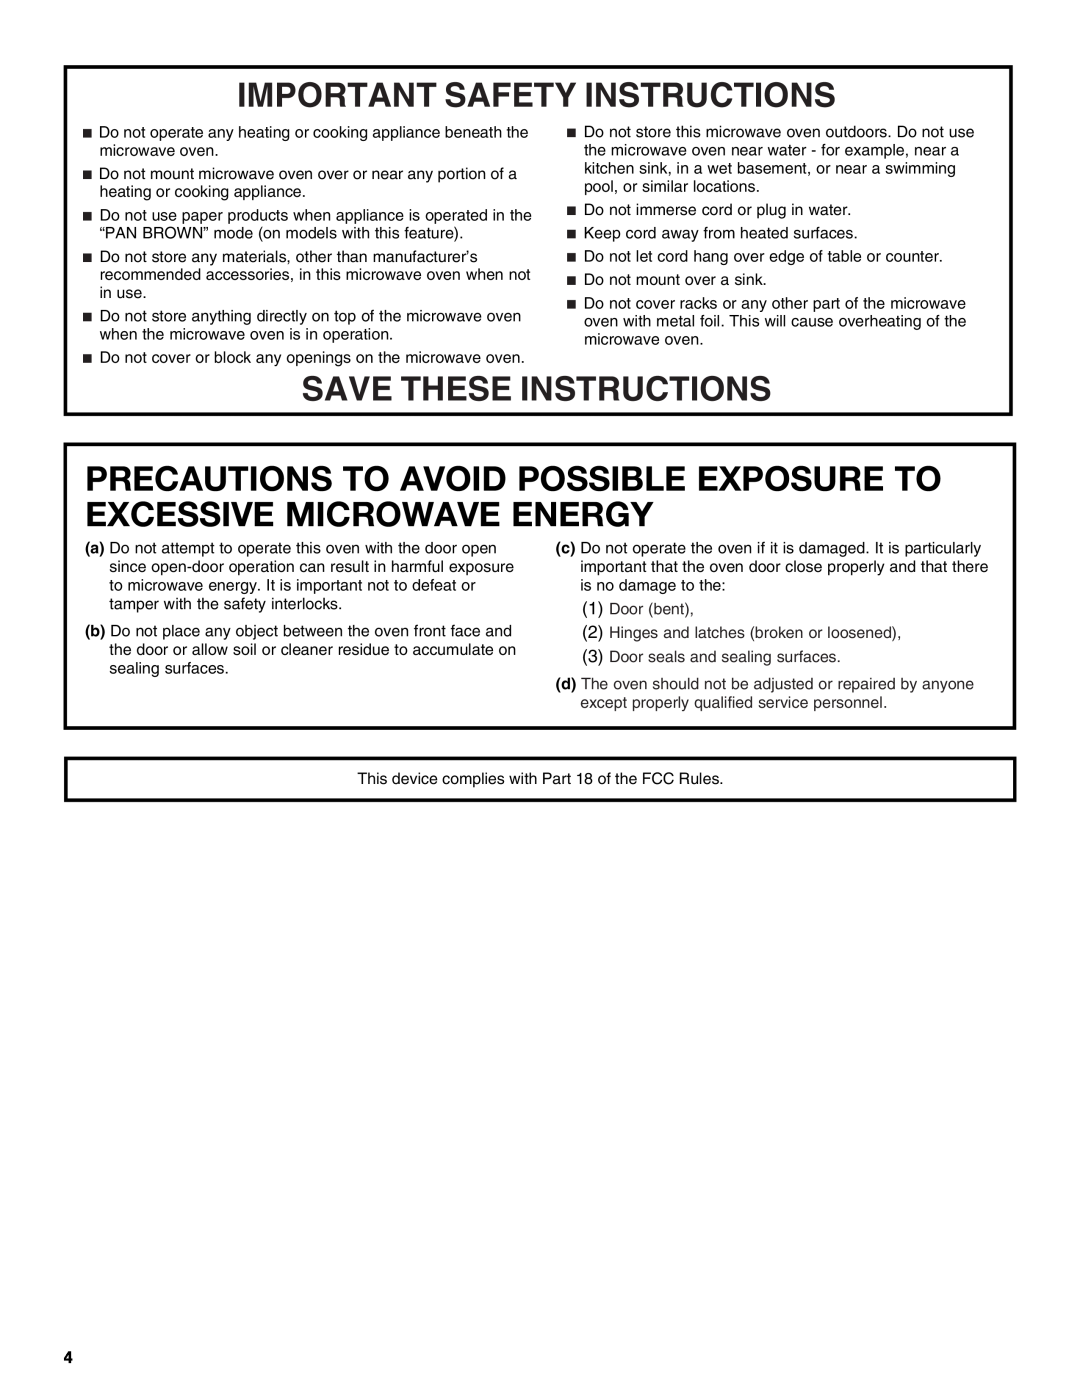 Whirlpool MT4110 manual Precautions To Avoid Possible Exposure To Excessive Microwave Energy, Important Safety Instructions 